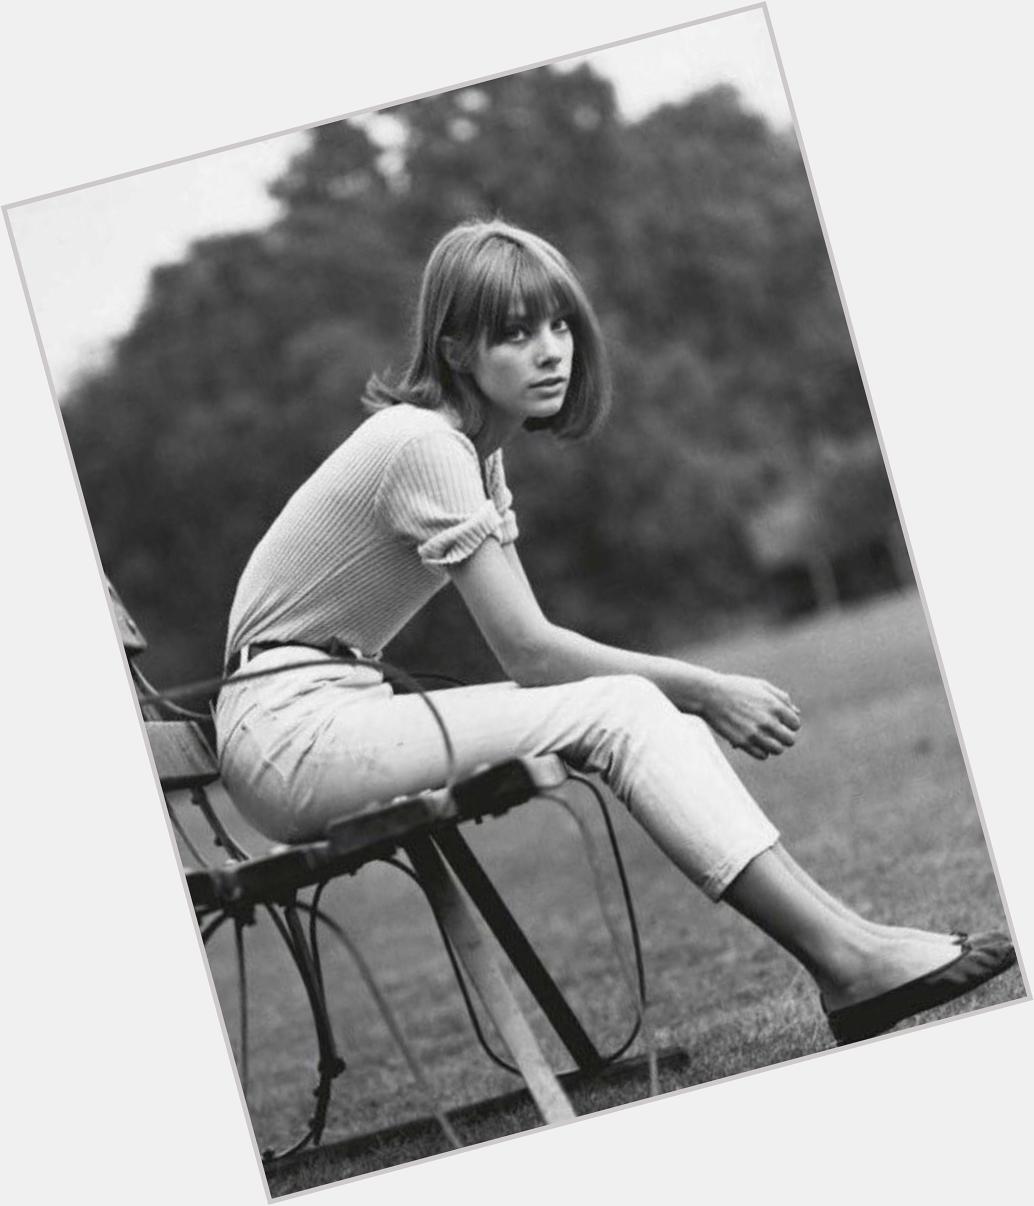 Happy Birthday to Jane Birkin. She is one of the epitomes of French style and an inspiration. 